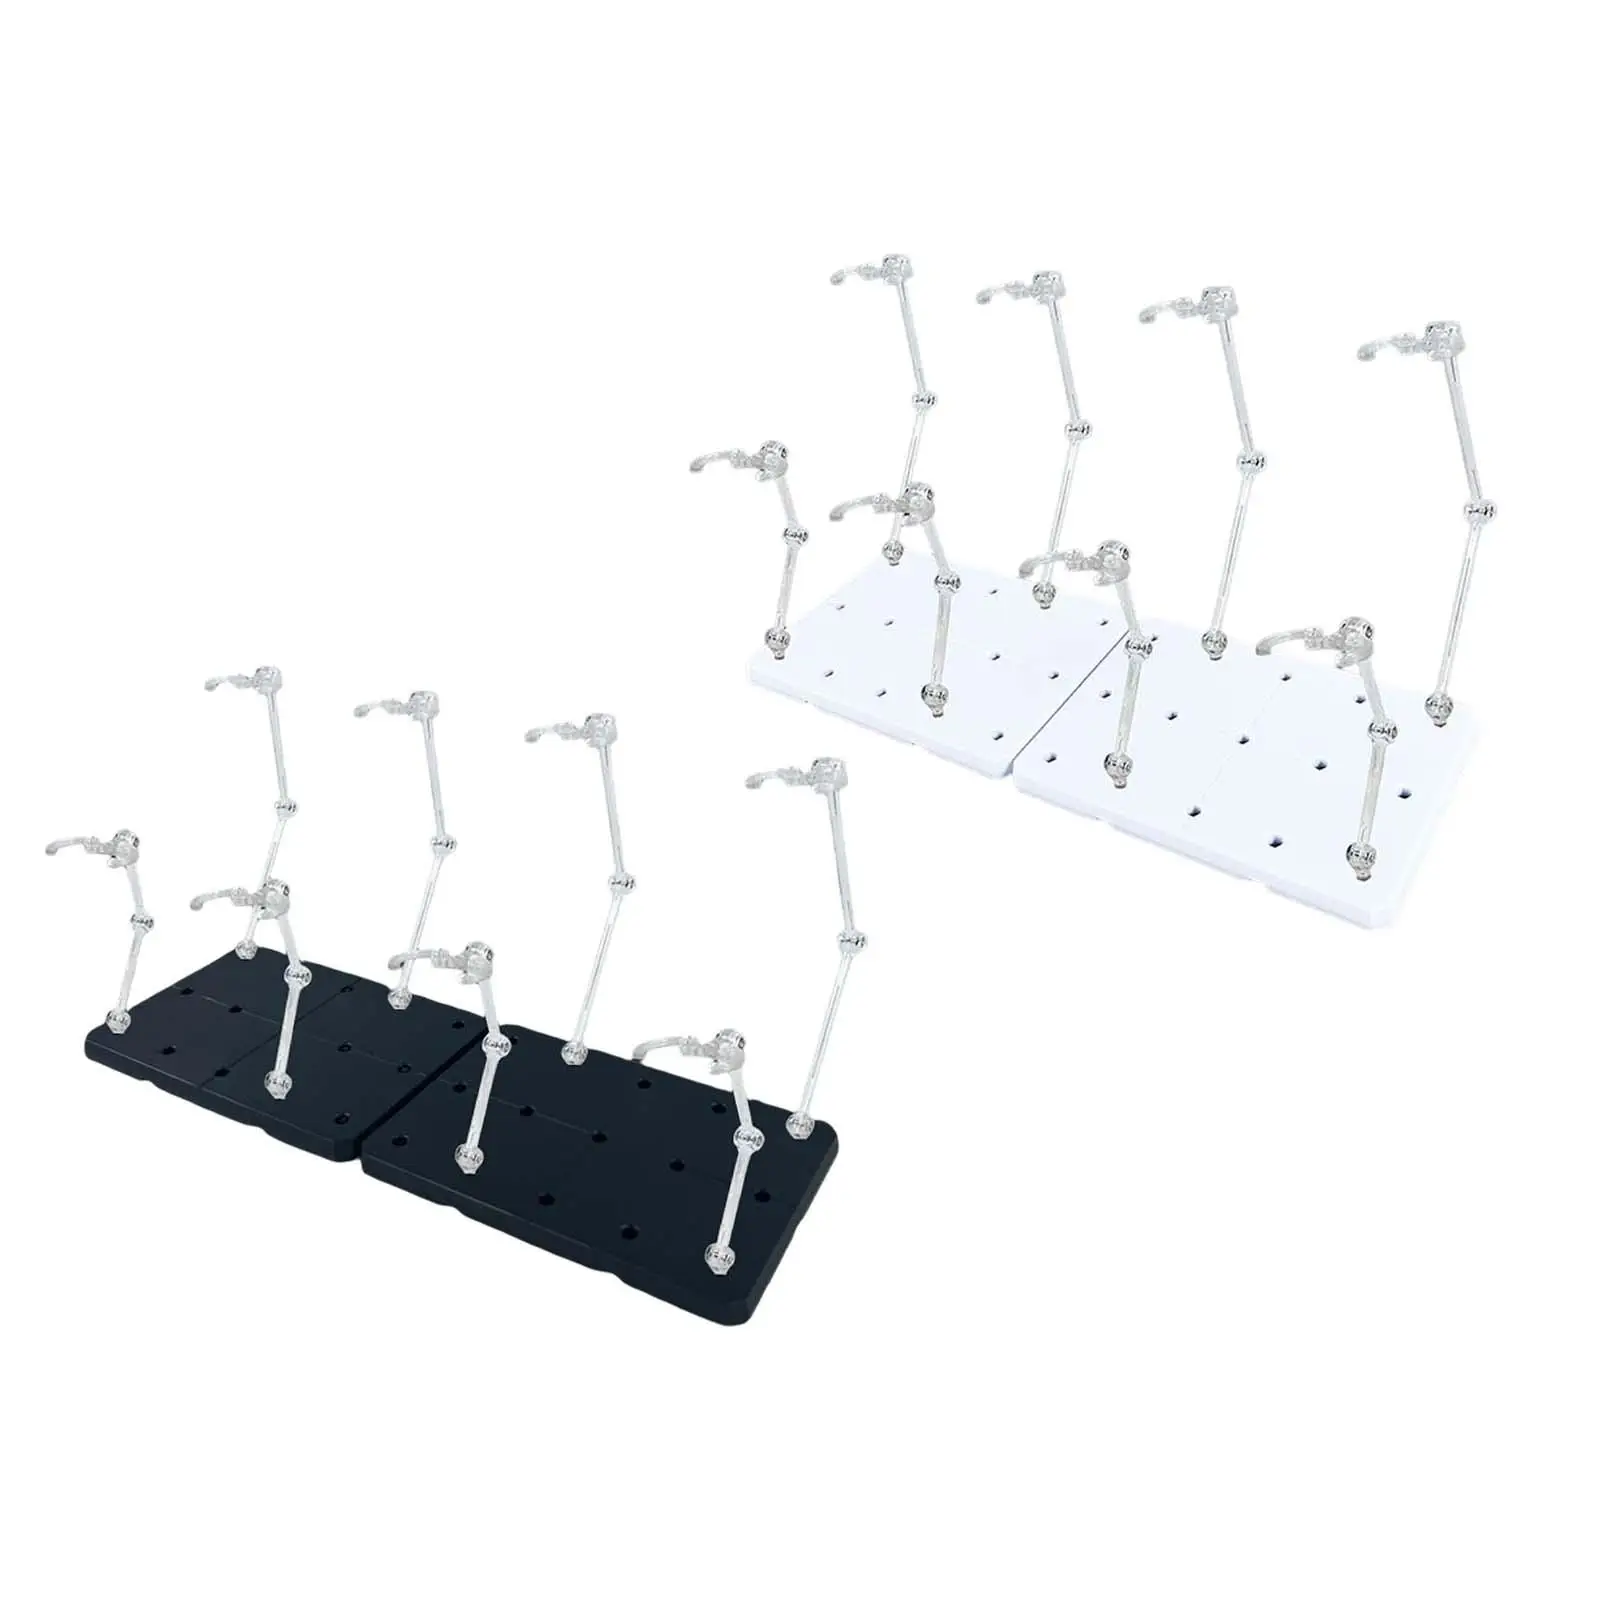 Model Stand Holder Action Figures Holders Rack Stent for 1:100 Scale 1:144 Scale Models Accessories Parts Collection